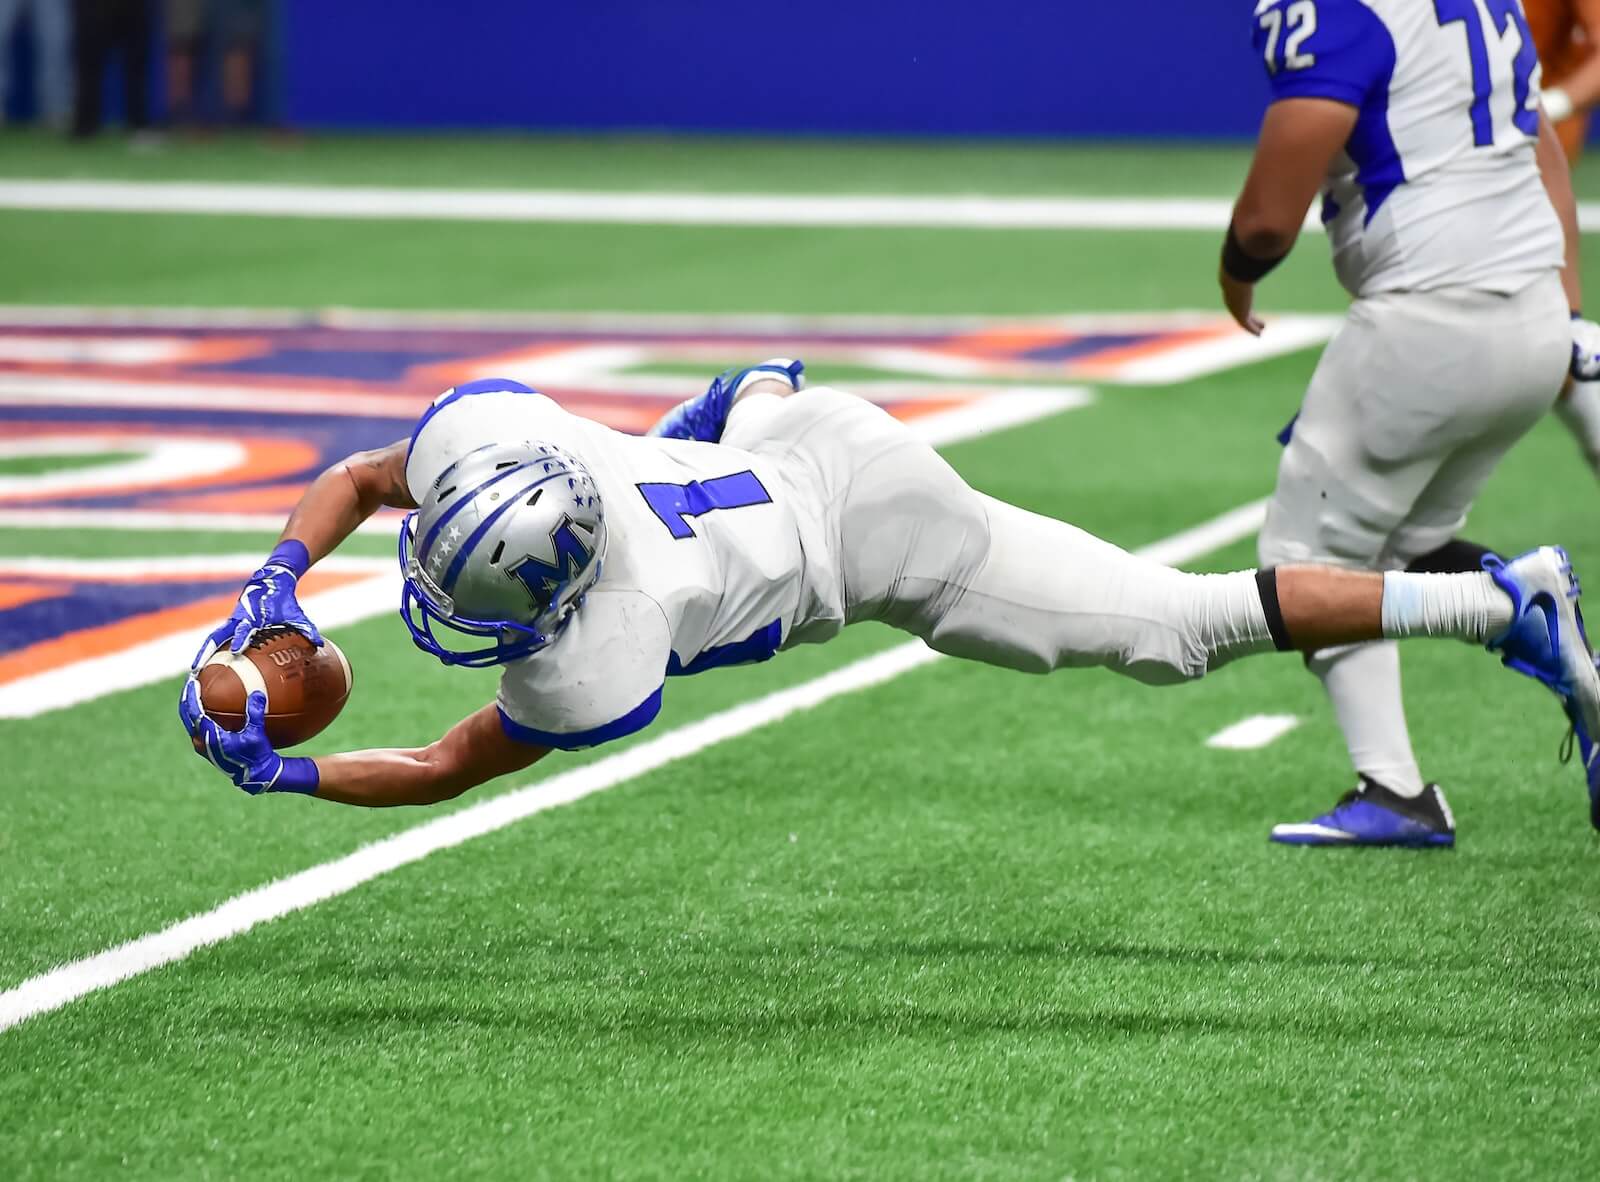 Football Player diving into the endzone